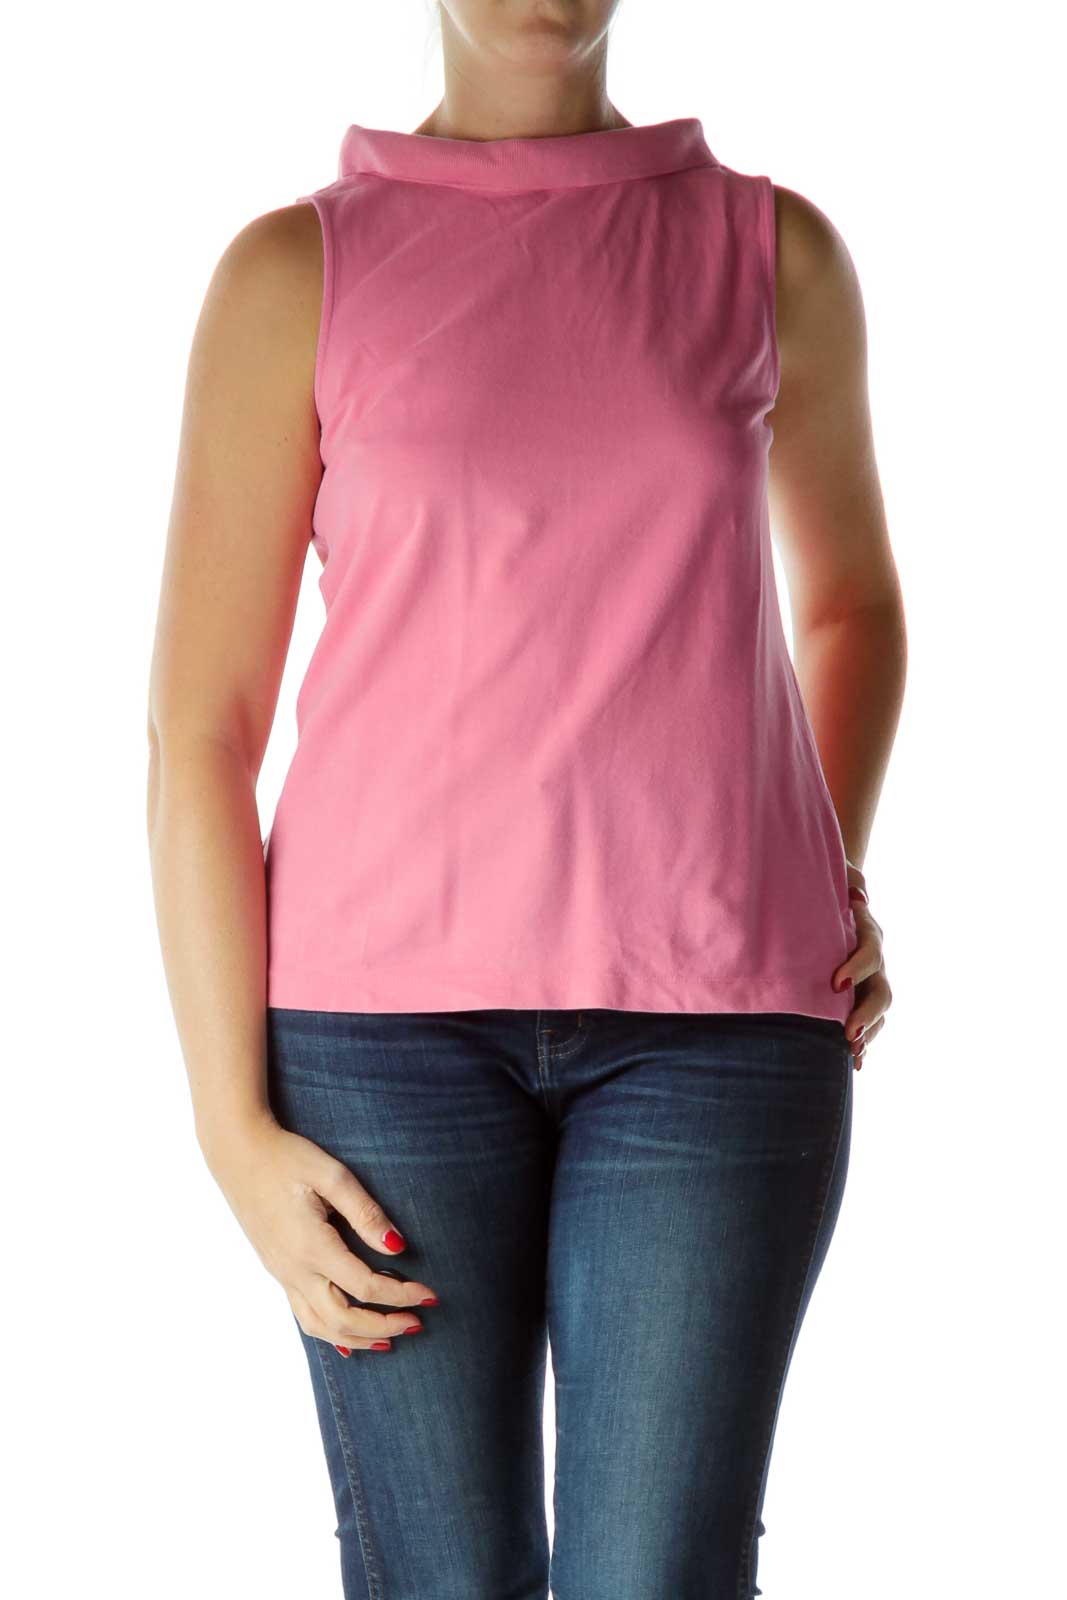 Pink Collared Sleeveless Jersey-Knit Shirt Front